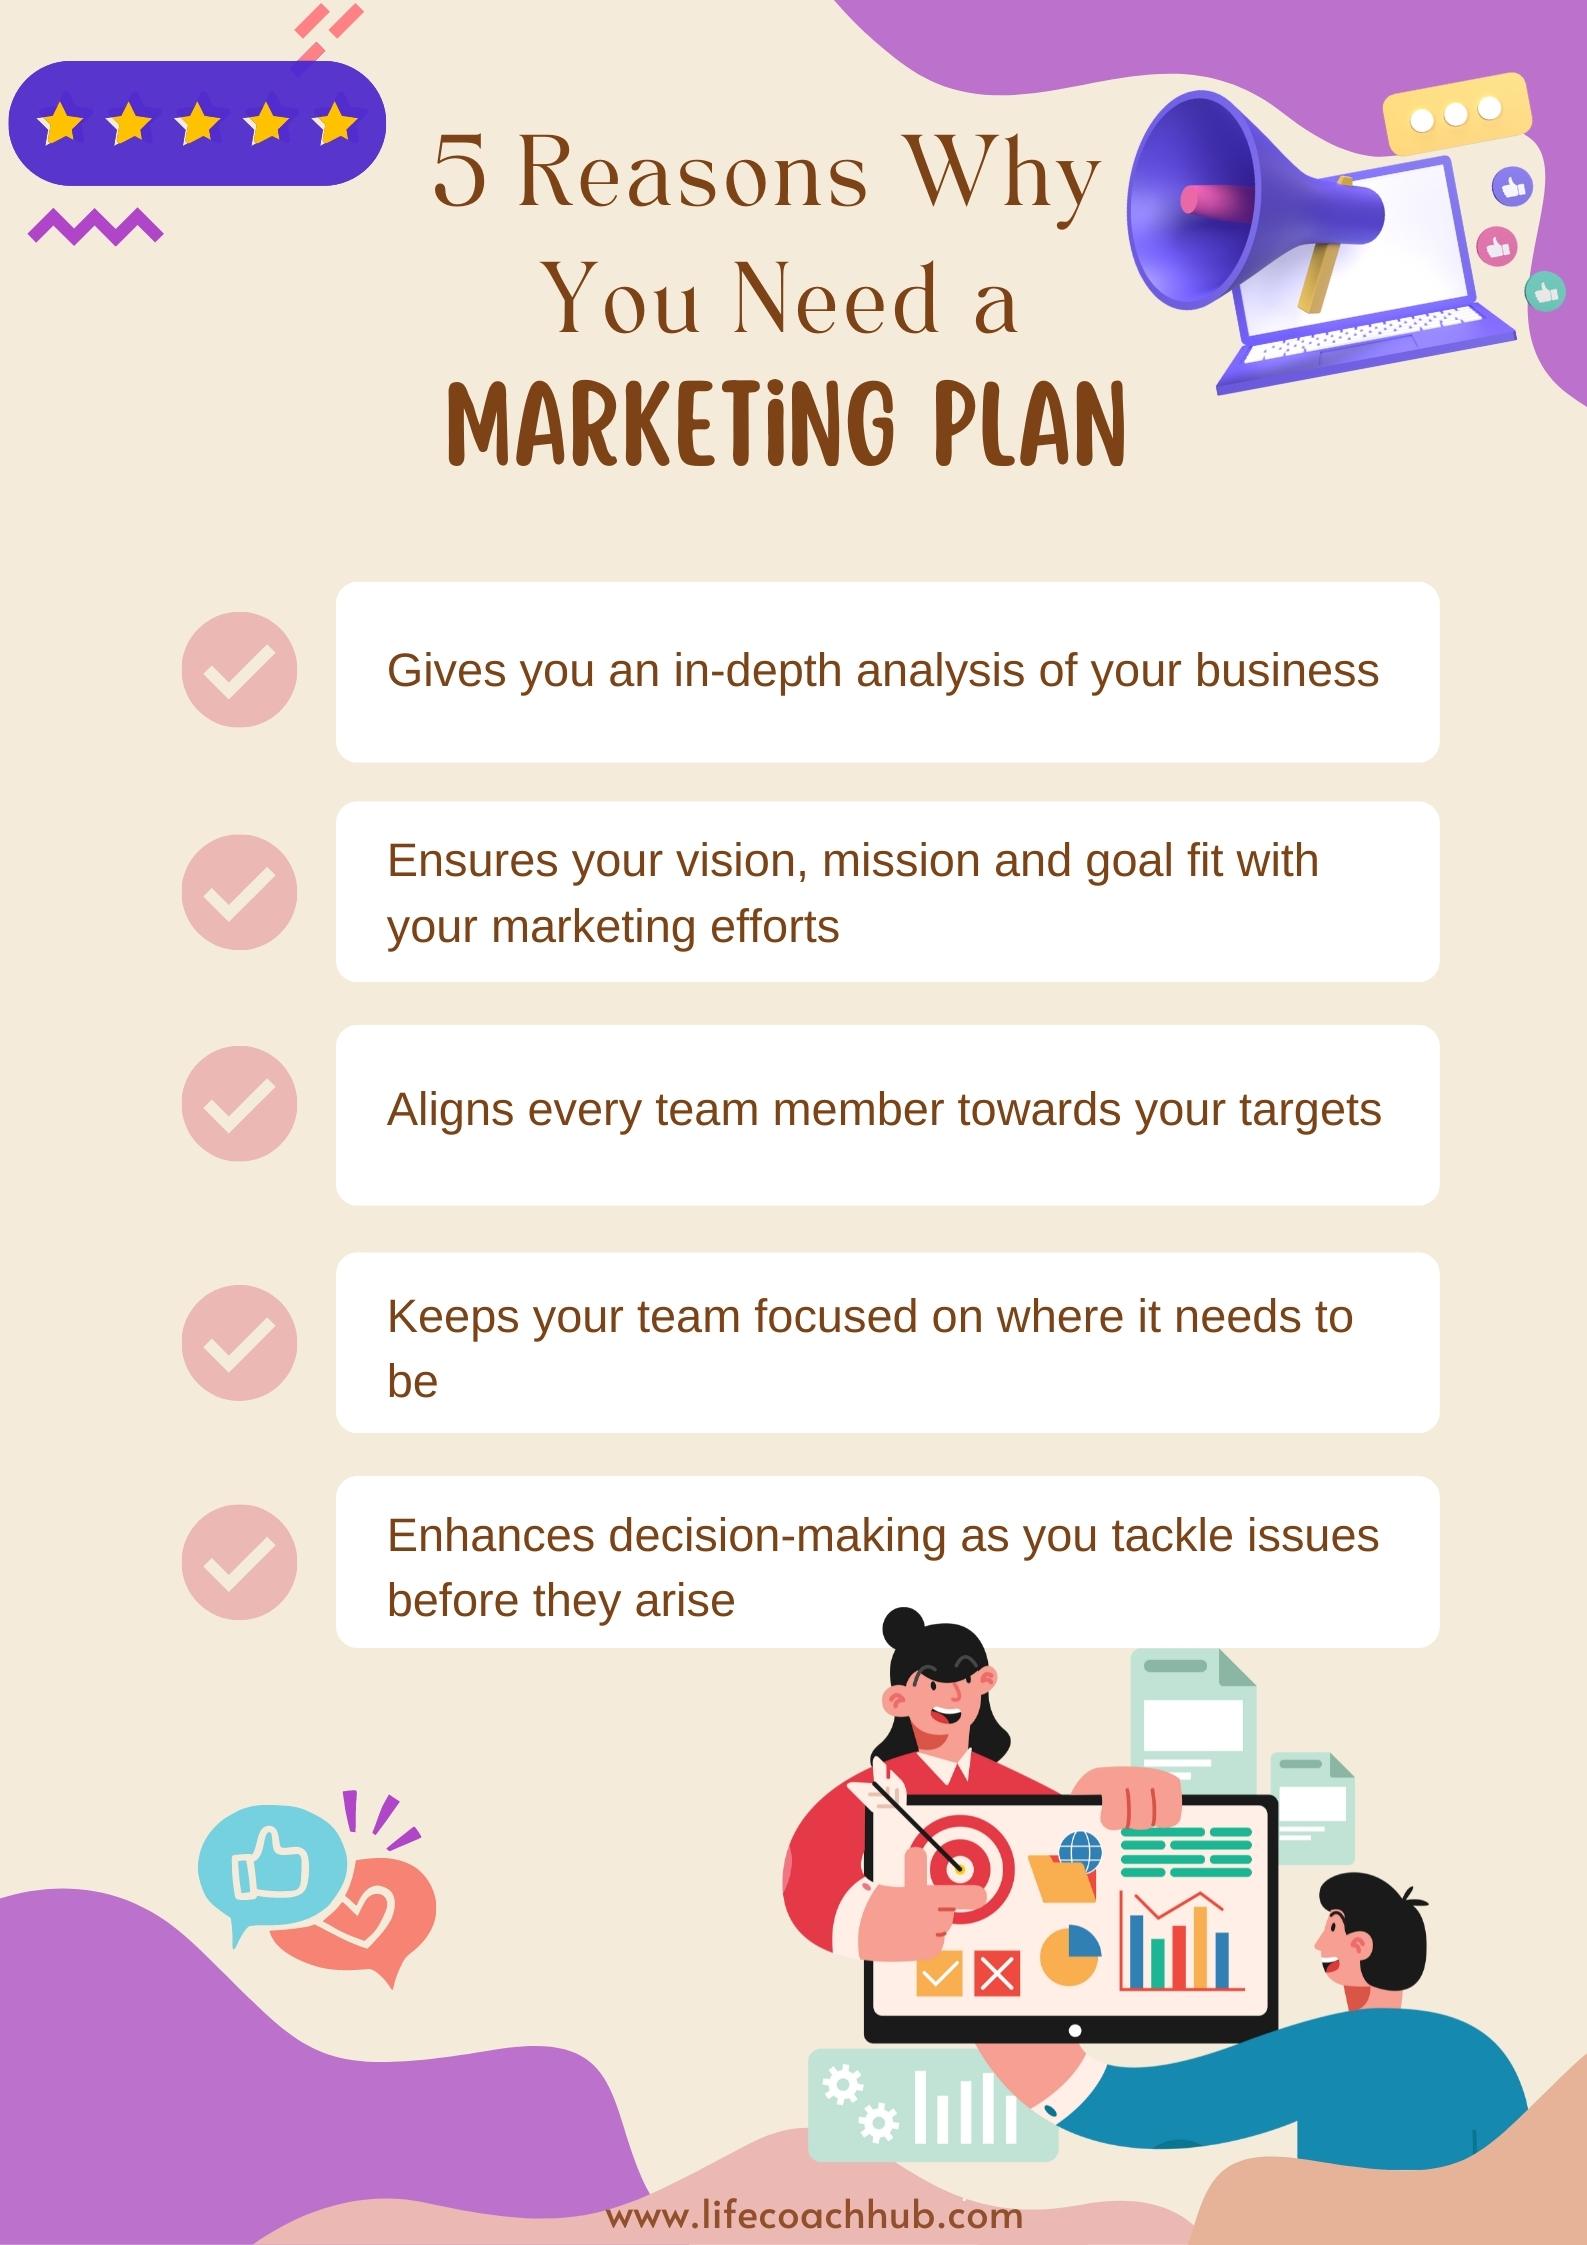 5 Reasons why you need a marketing plan